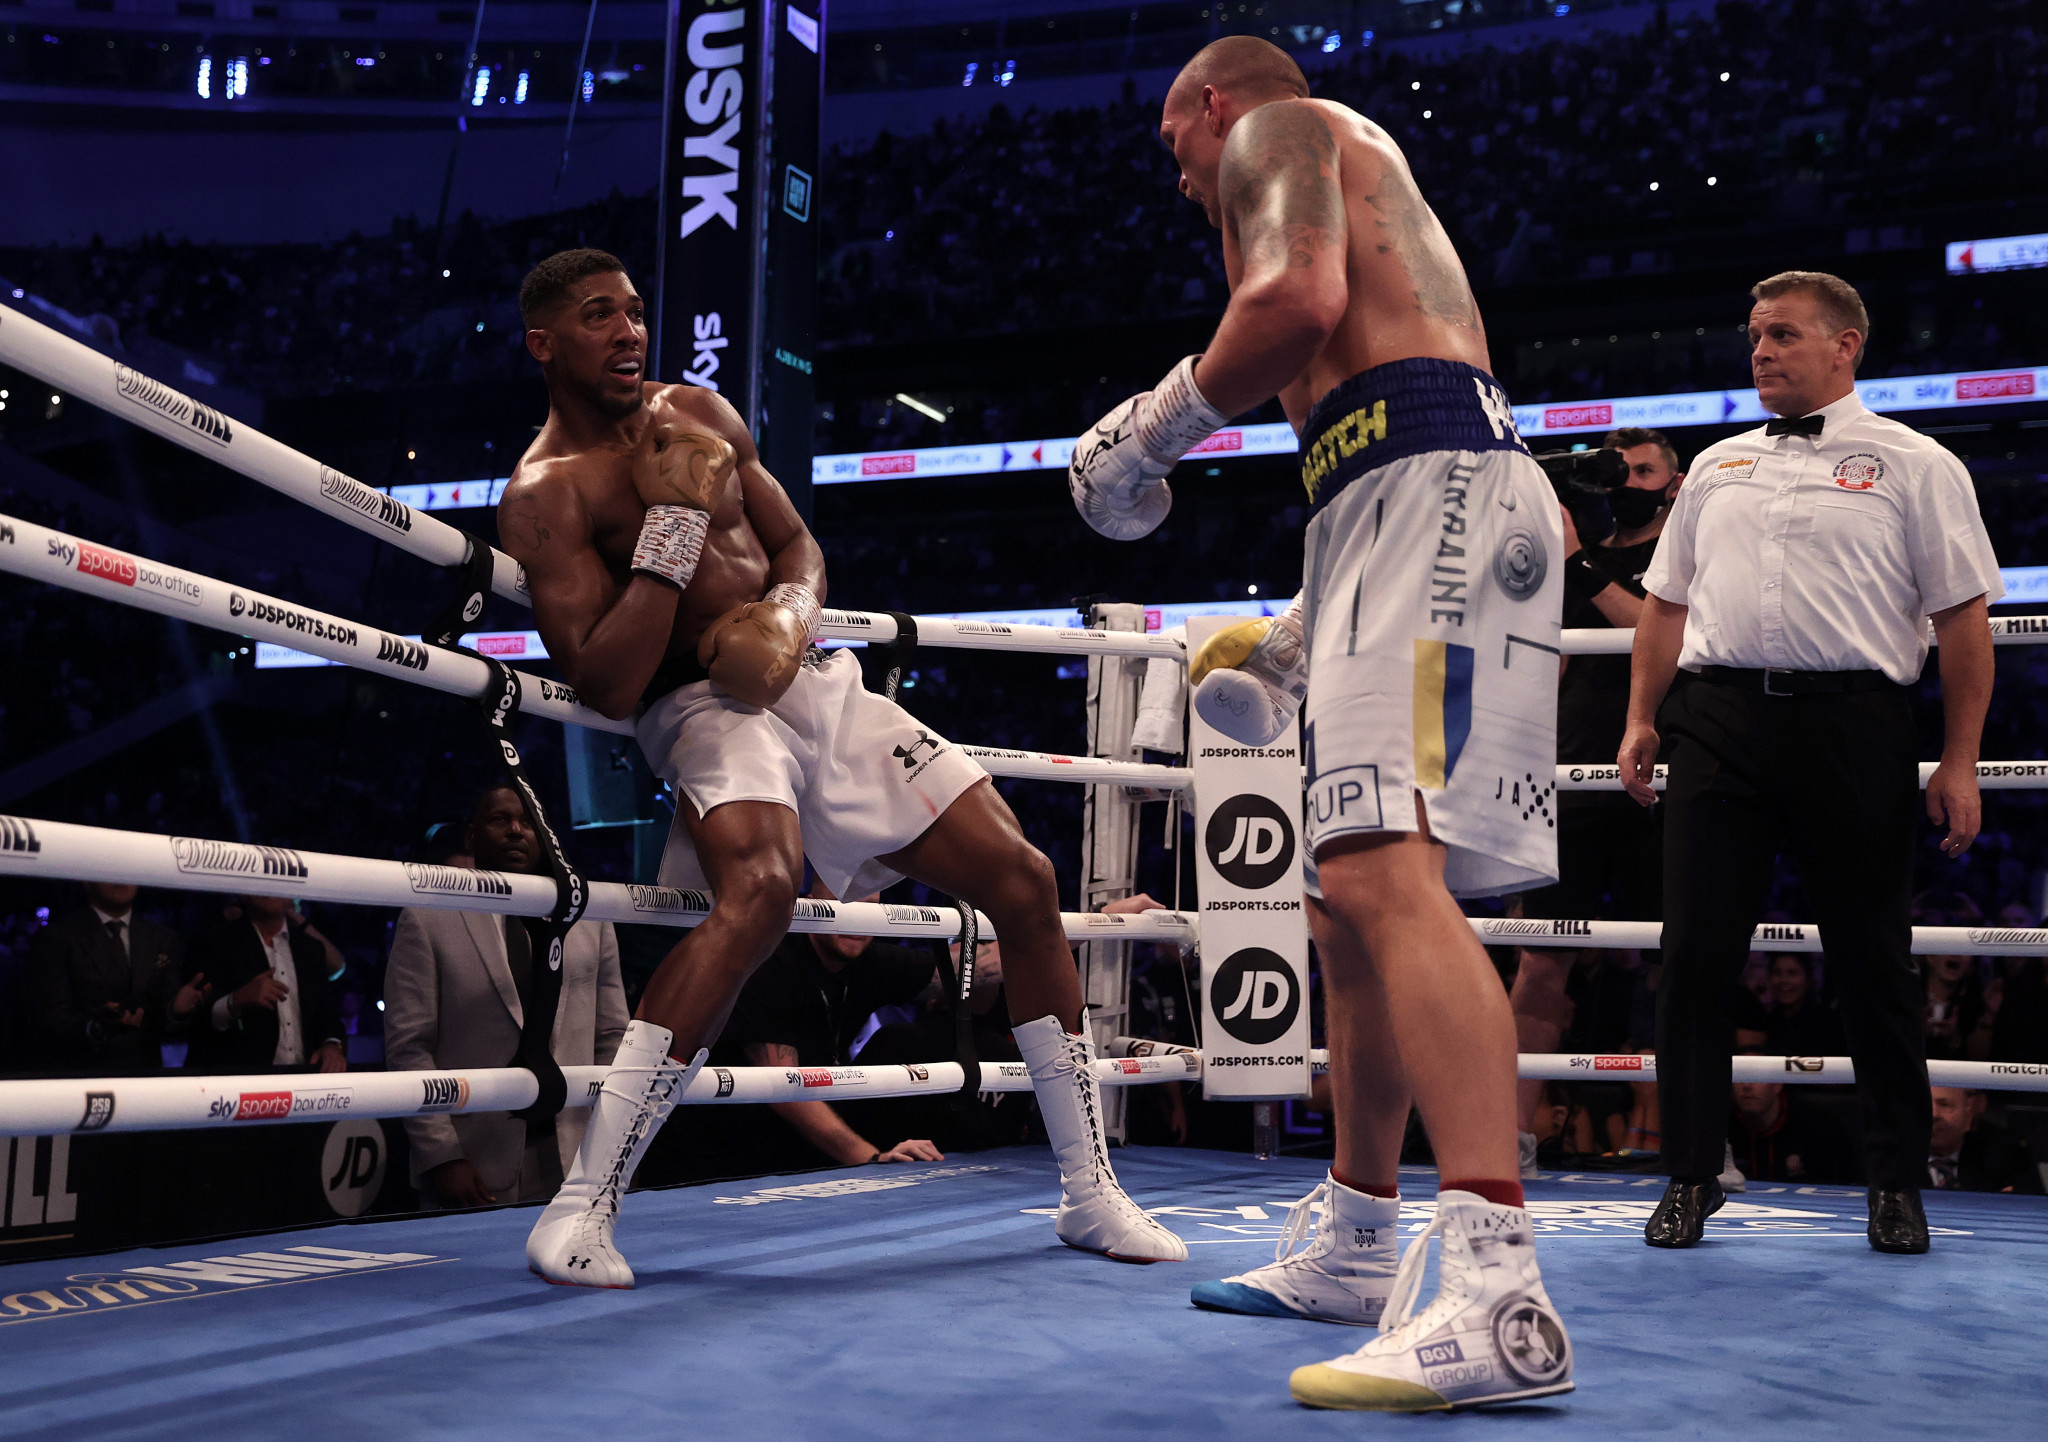 Oleksandr Usyk shocked Anthony Joshua when they met in a title bout last year ©Getty Images